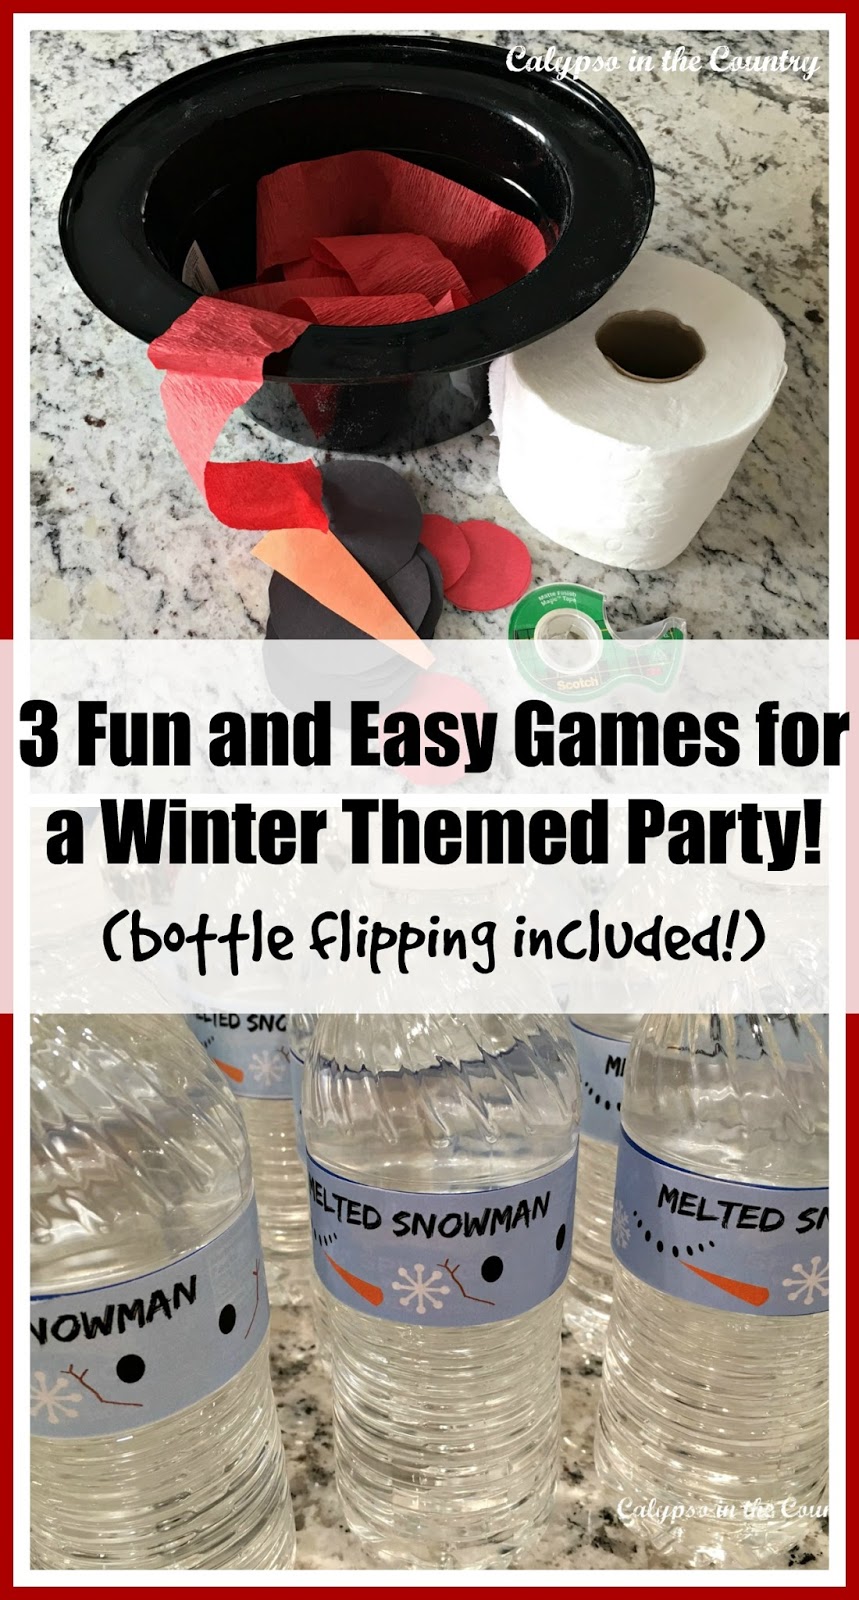 3 Fun and Easy Games for a Winter Themed Party - Bottle Flipping Included!